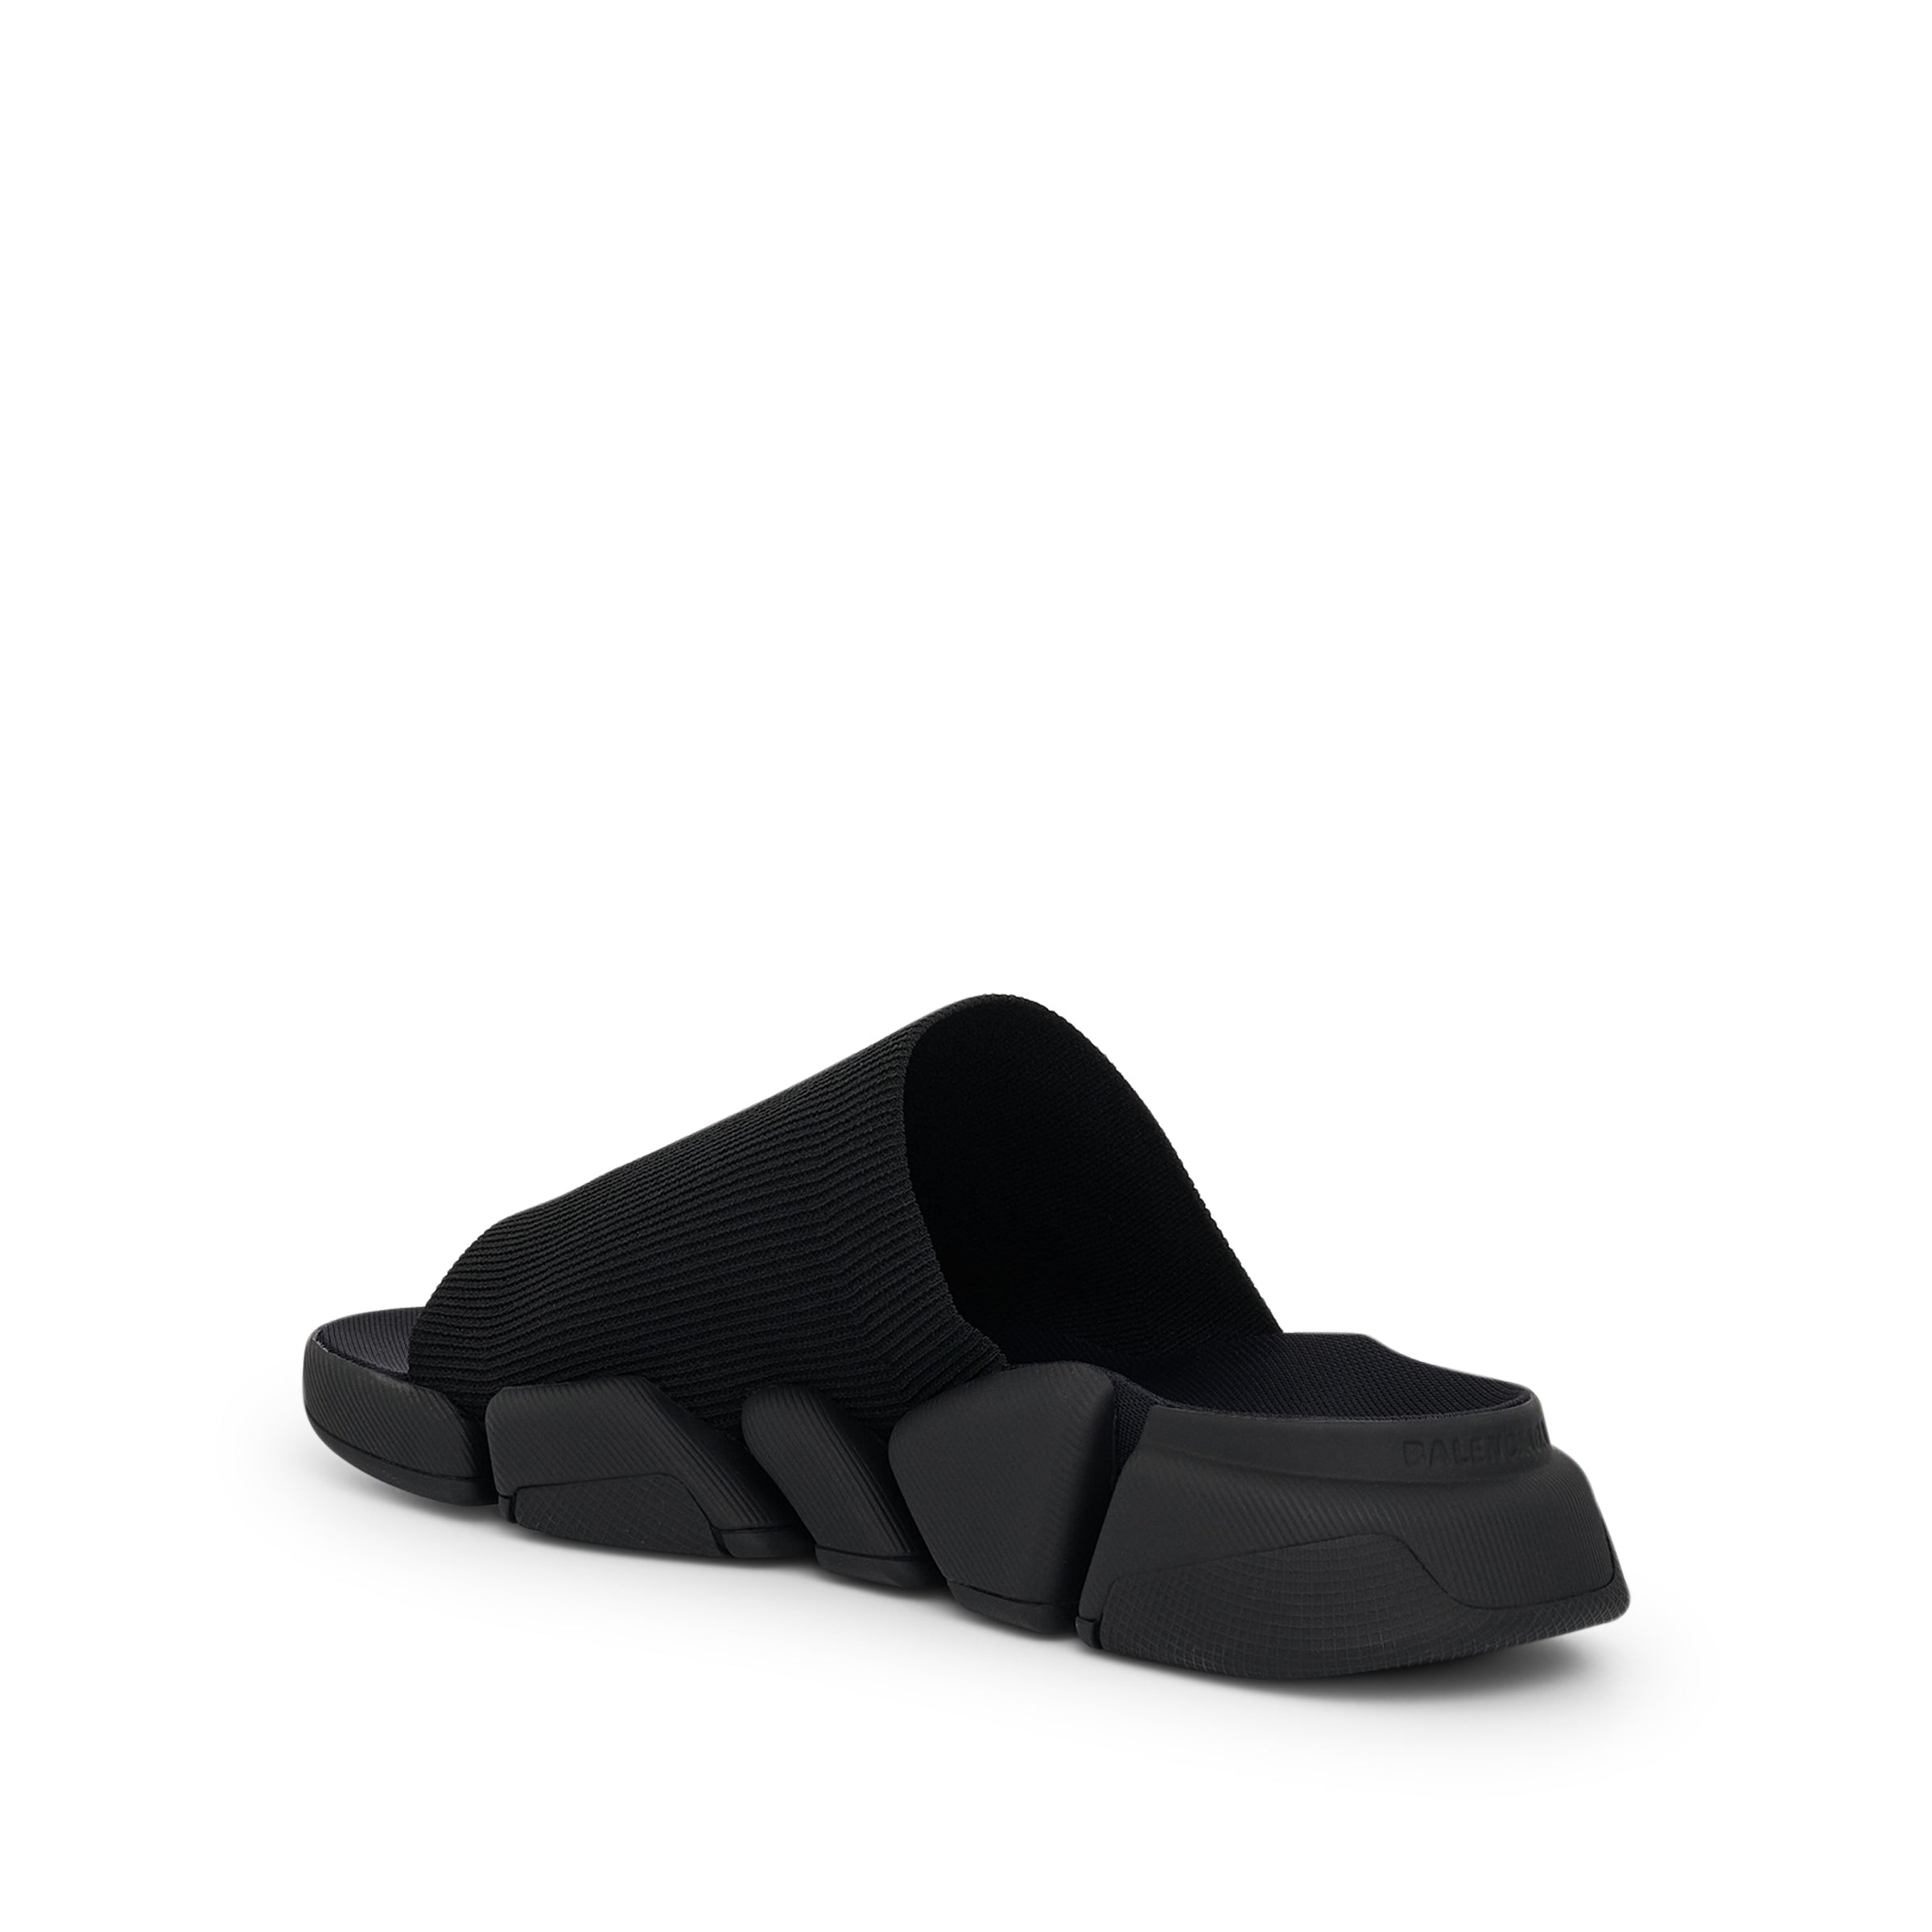 Speed 2.0 Recycled Knit Slide in Black - 3